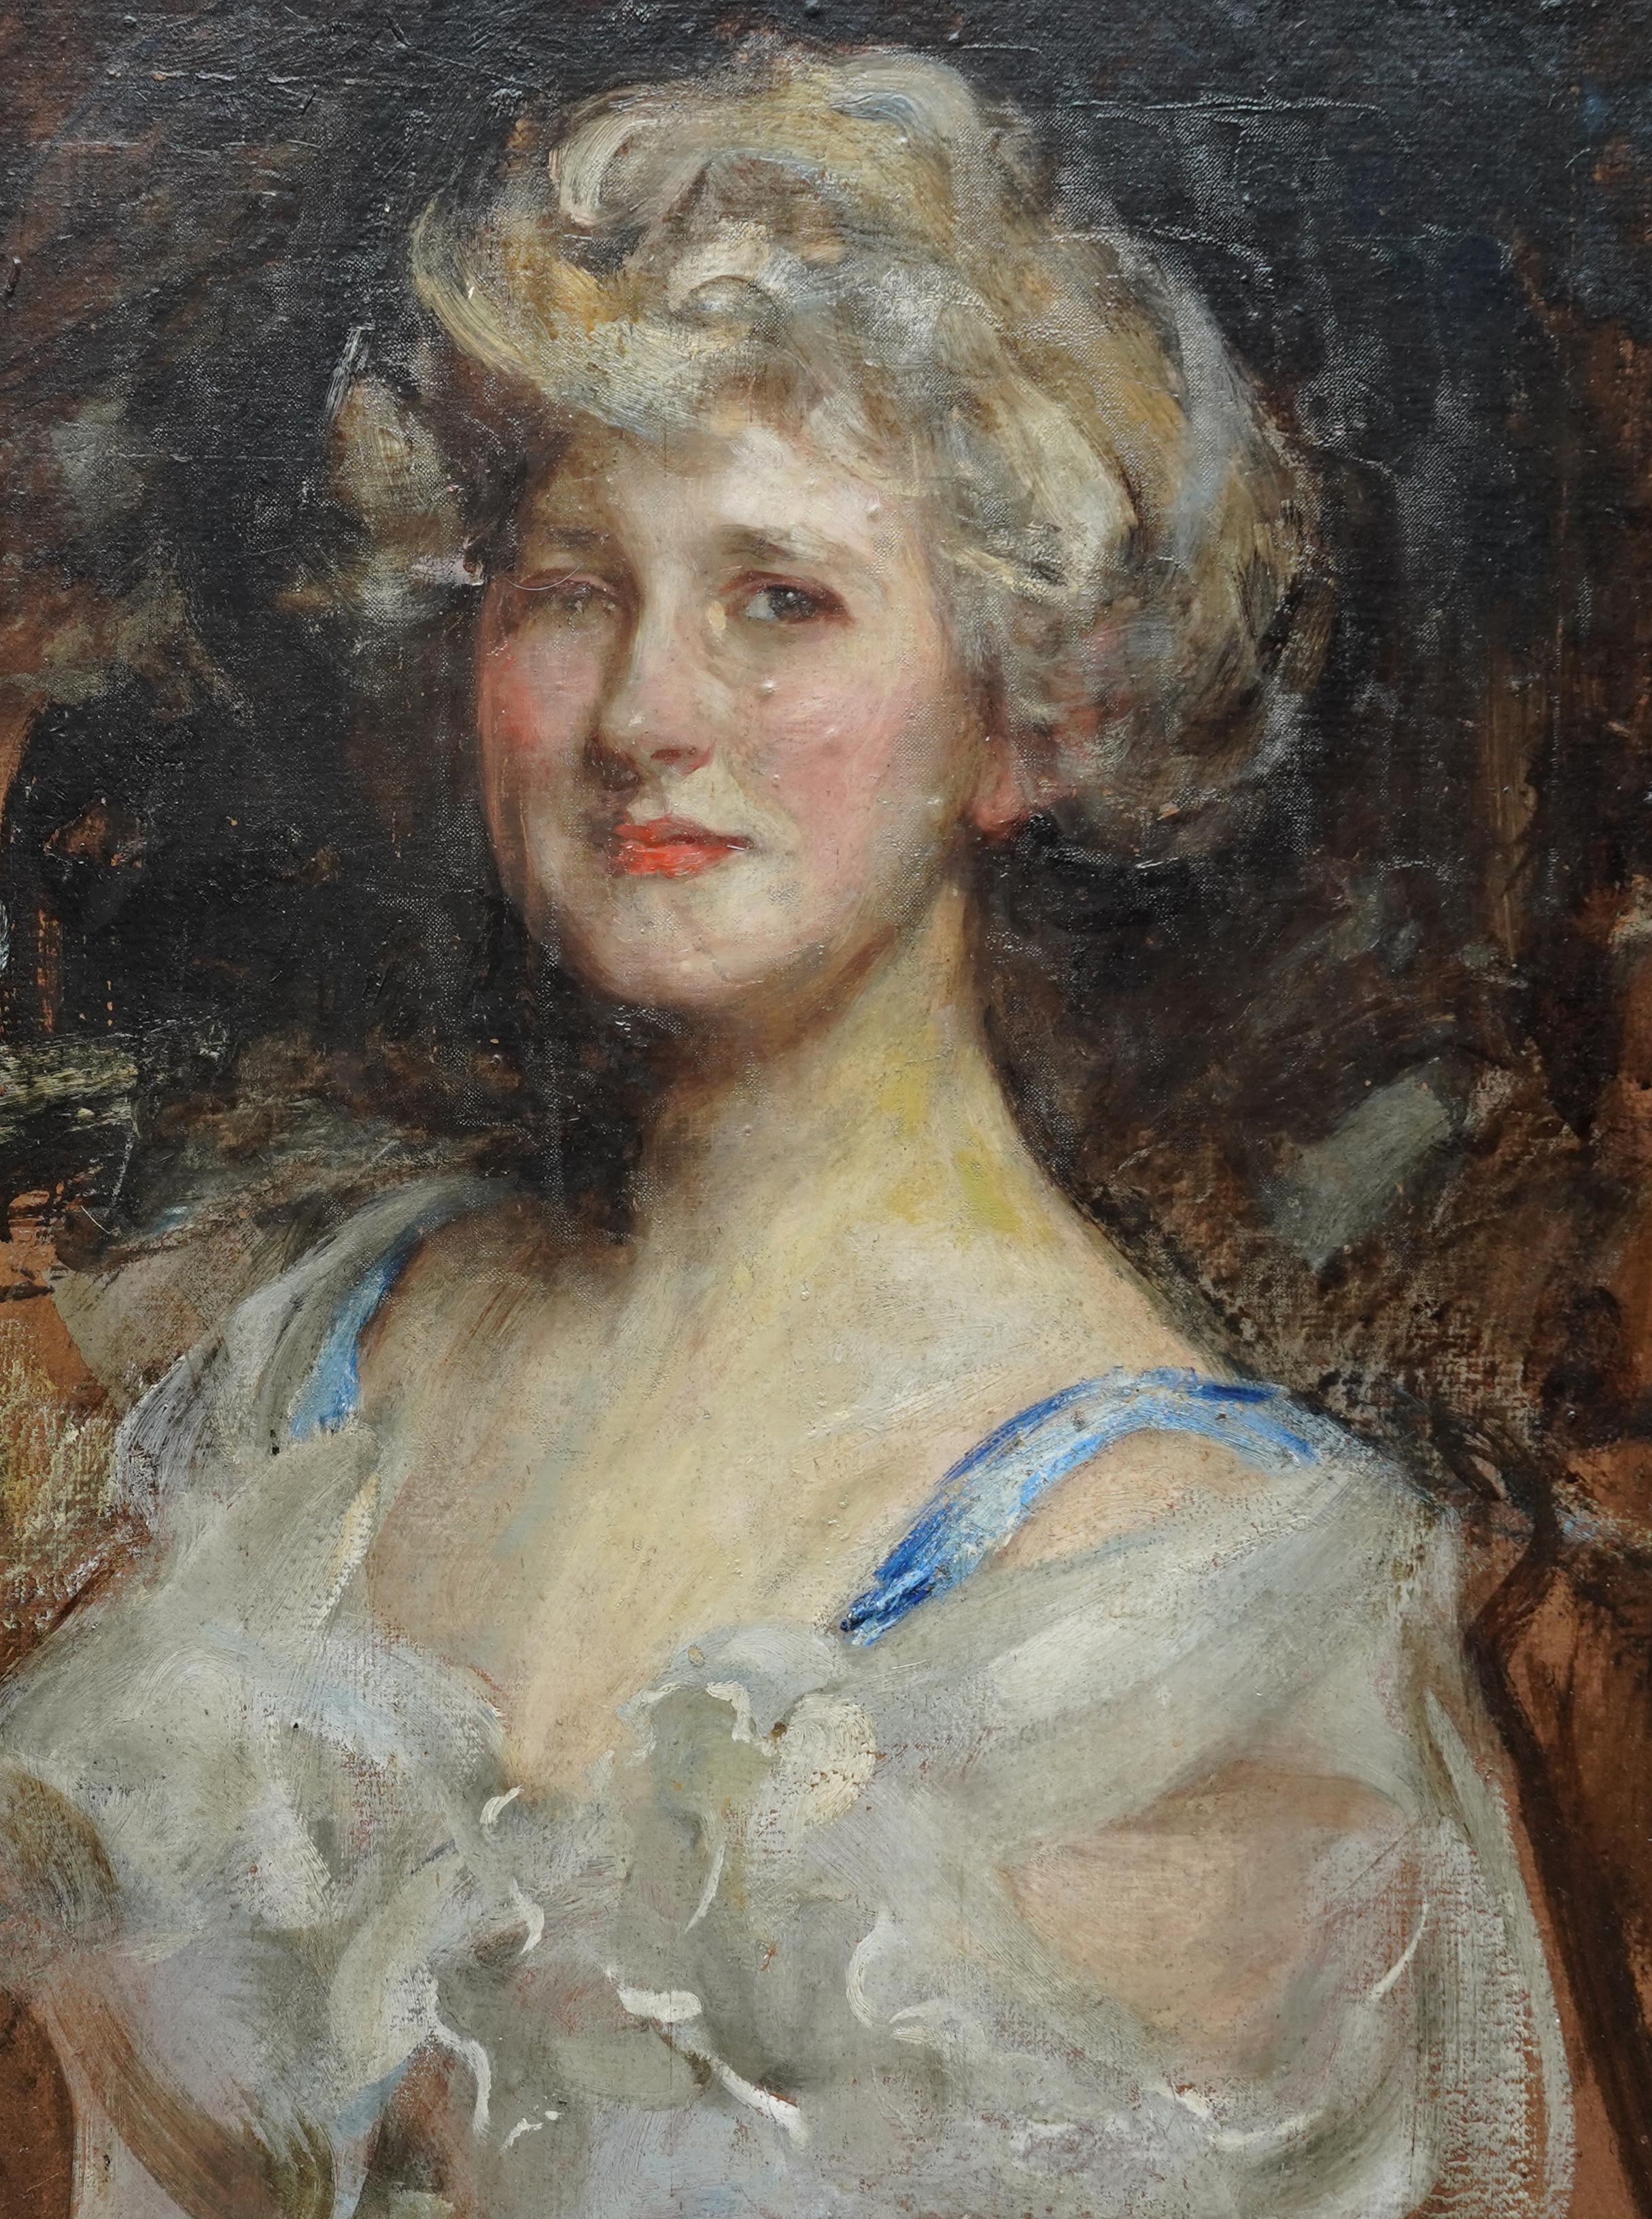  This superb British Edwardian Impressionist portrait oil painting is by noted portrait artist James Jebusa Shannon. Painted circa 1906, oil on panel and part of a family collection, it is a half length portrait of a blond lady in lace which is